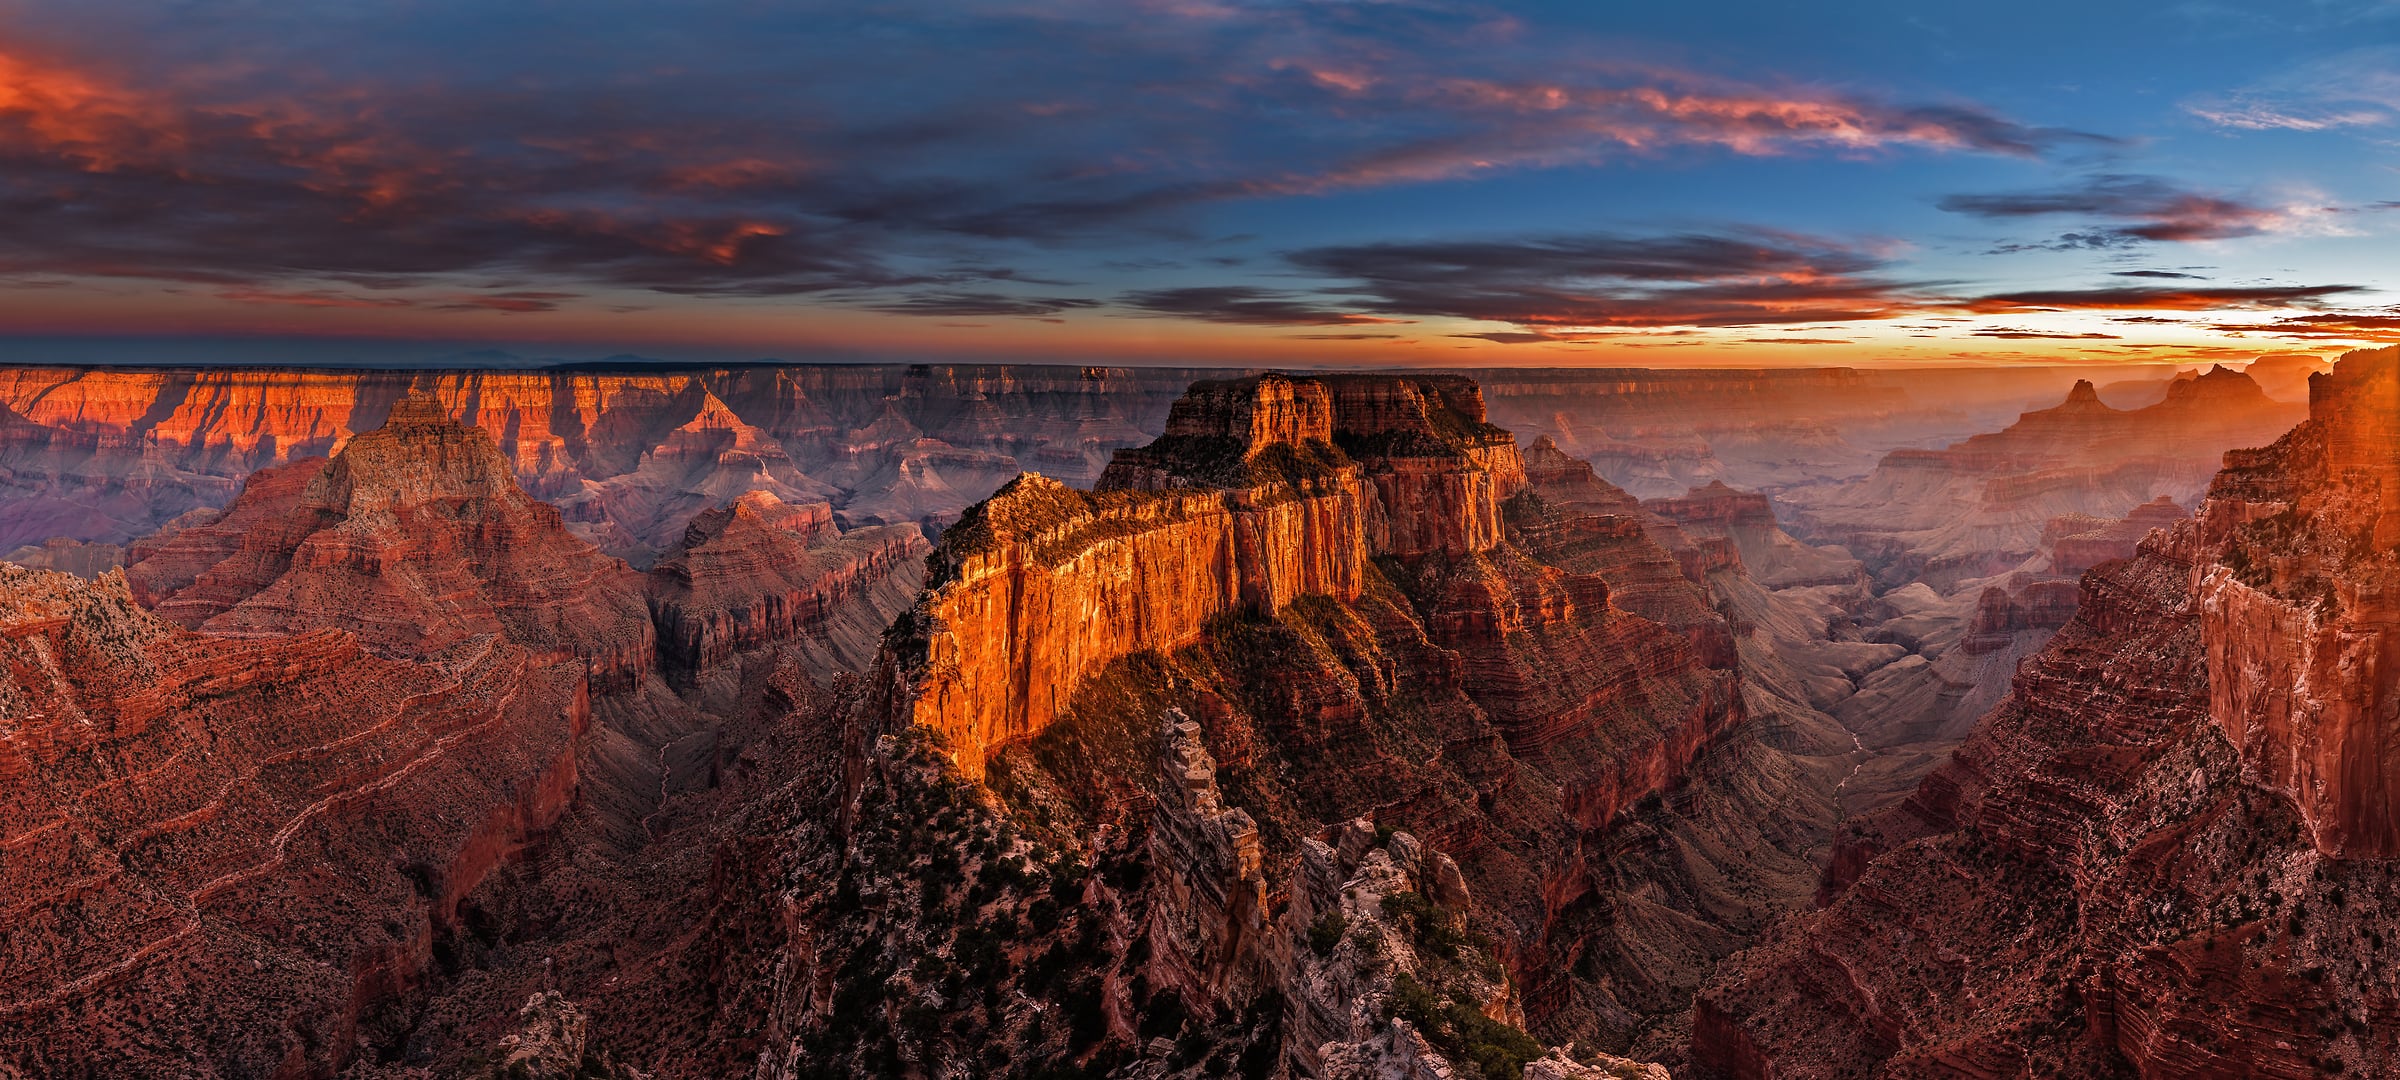 508 megapixels! A very high resolution, large-format VAST photo print of the Grand Canyon at sunset; fine art landscape photo created by Chris Collacott in Grand Canyon National Park, Arizona.